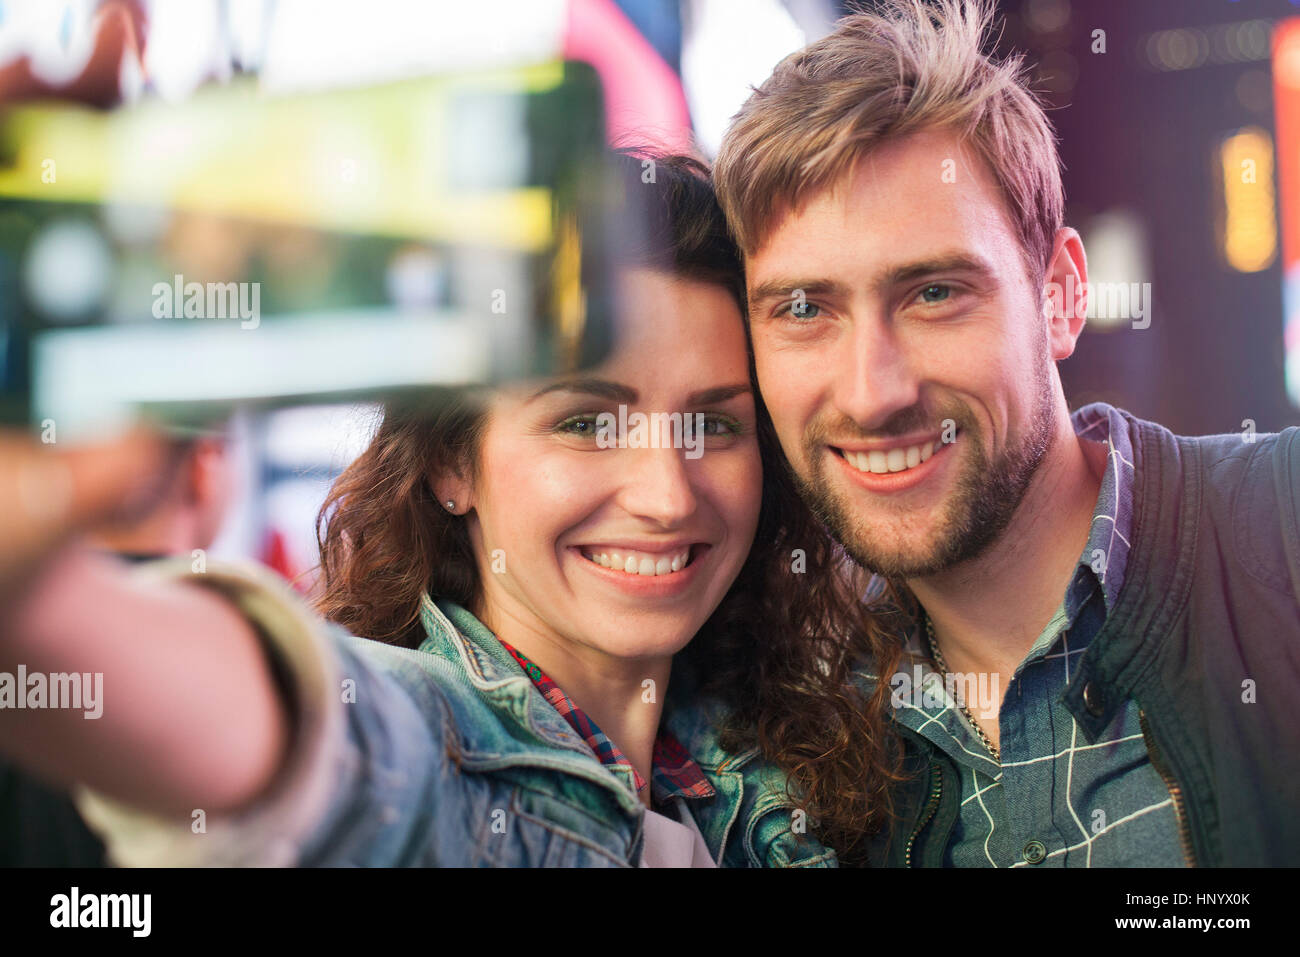 Young couple taking selfie in illuminated city street Stock Photo